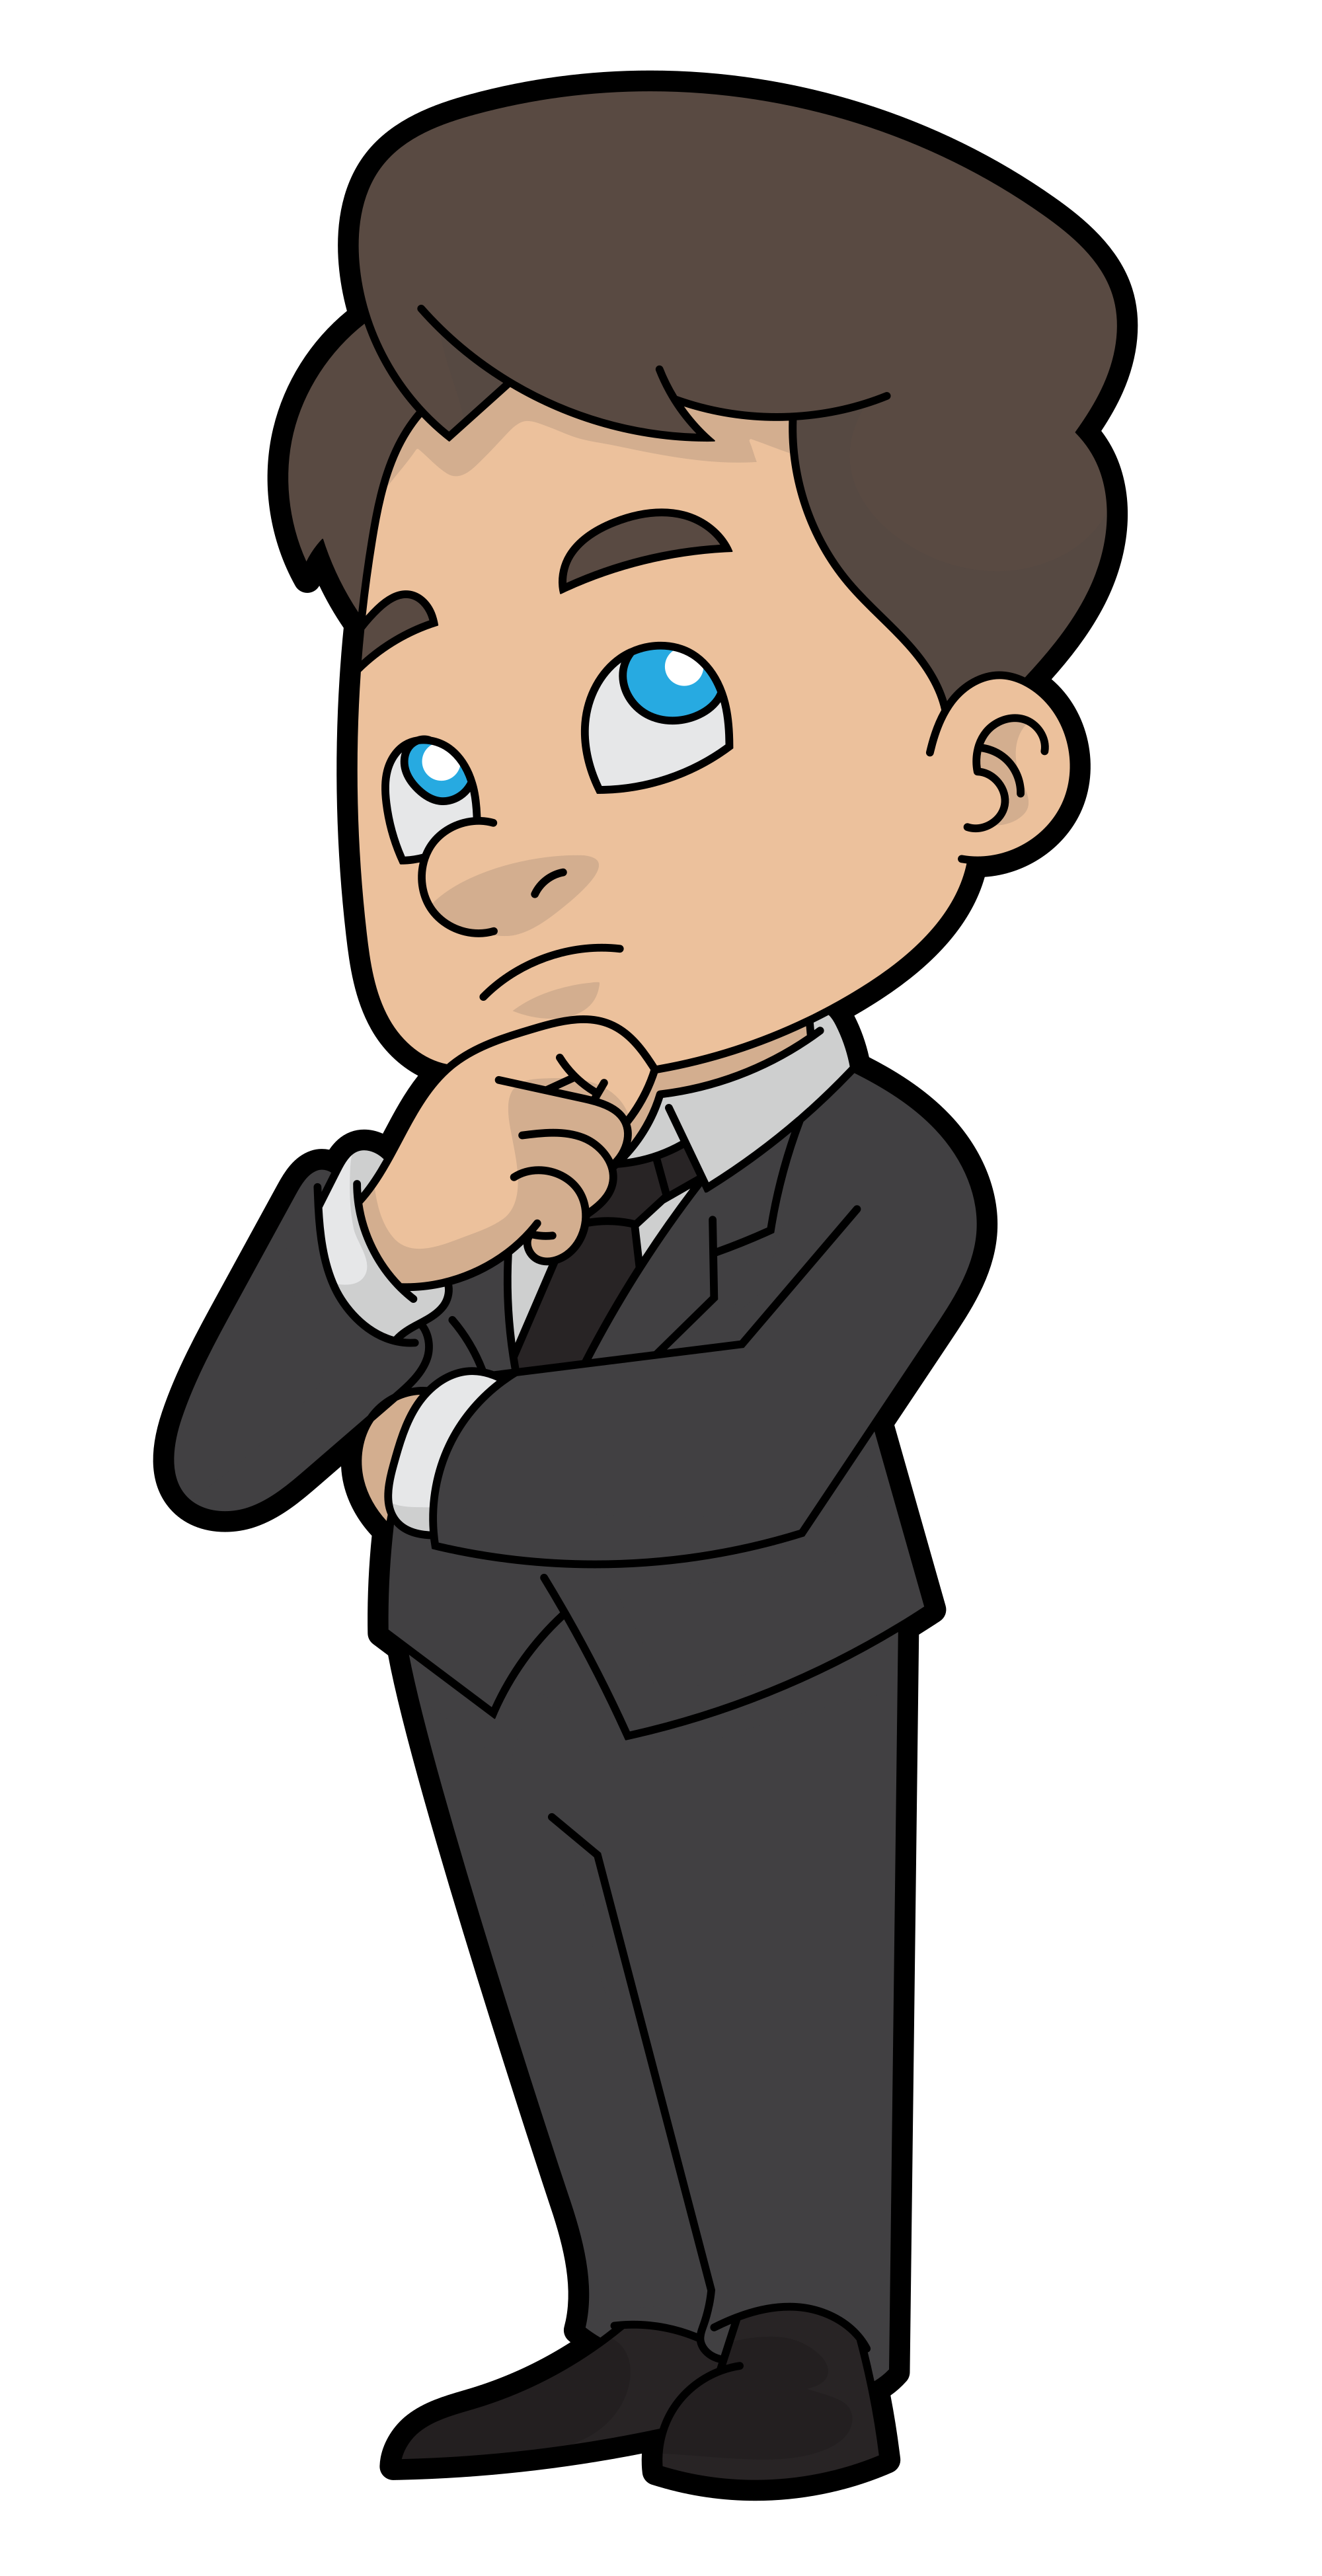 Download PNG image - Animated Businessman PNG Image 